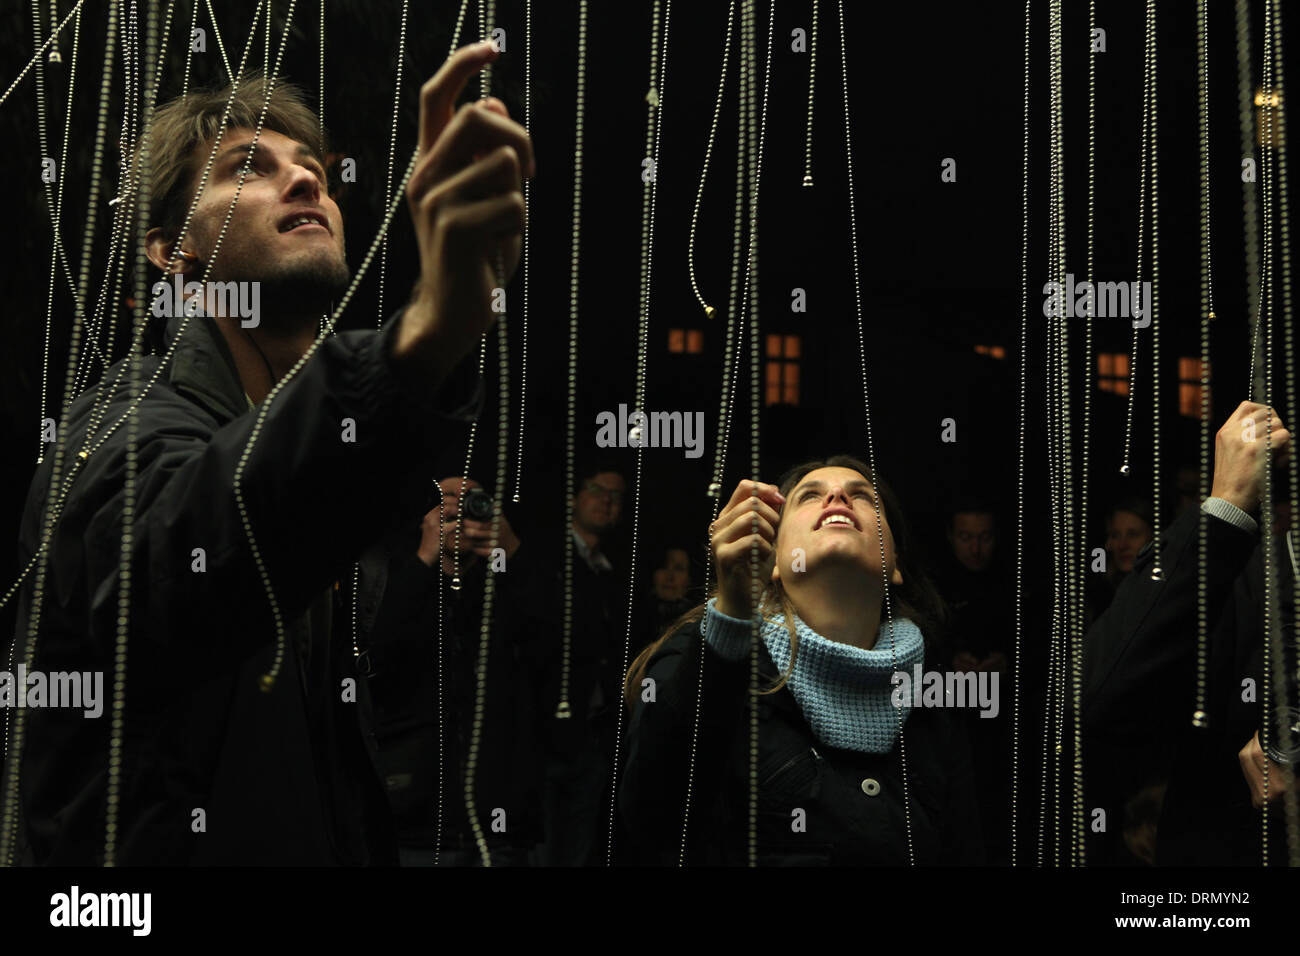 People switch lights on and off on an interactive sculpture The Cloud during the Signal Festival in Prague, Czech Republic. Stock Photo